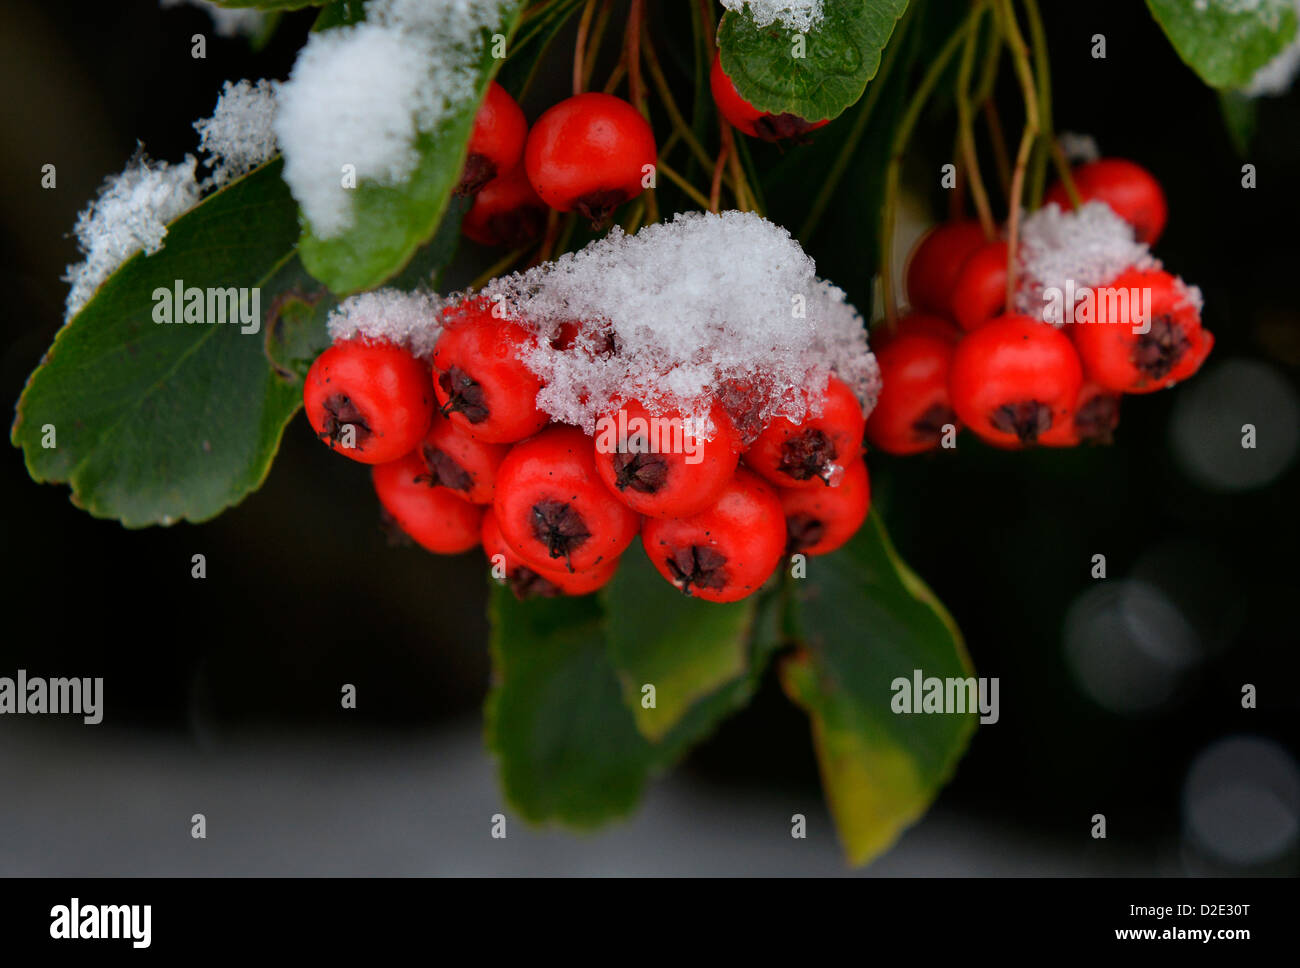 Red Cotoneaster berries covered in snow Stock Photo